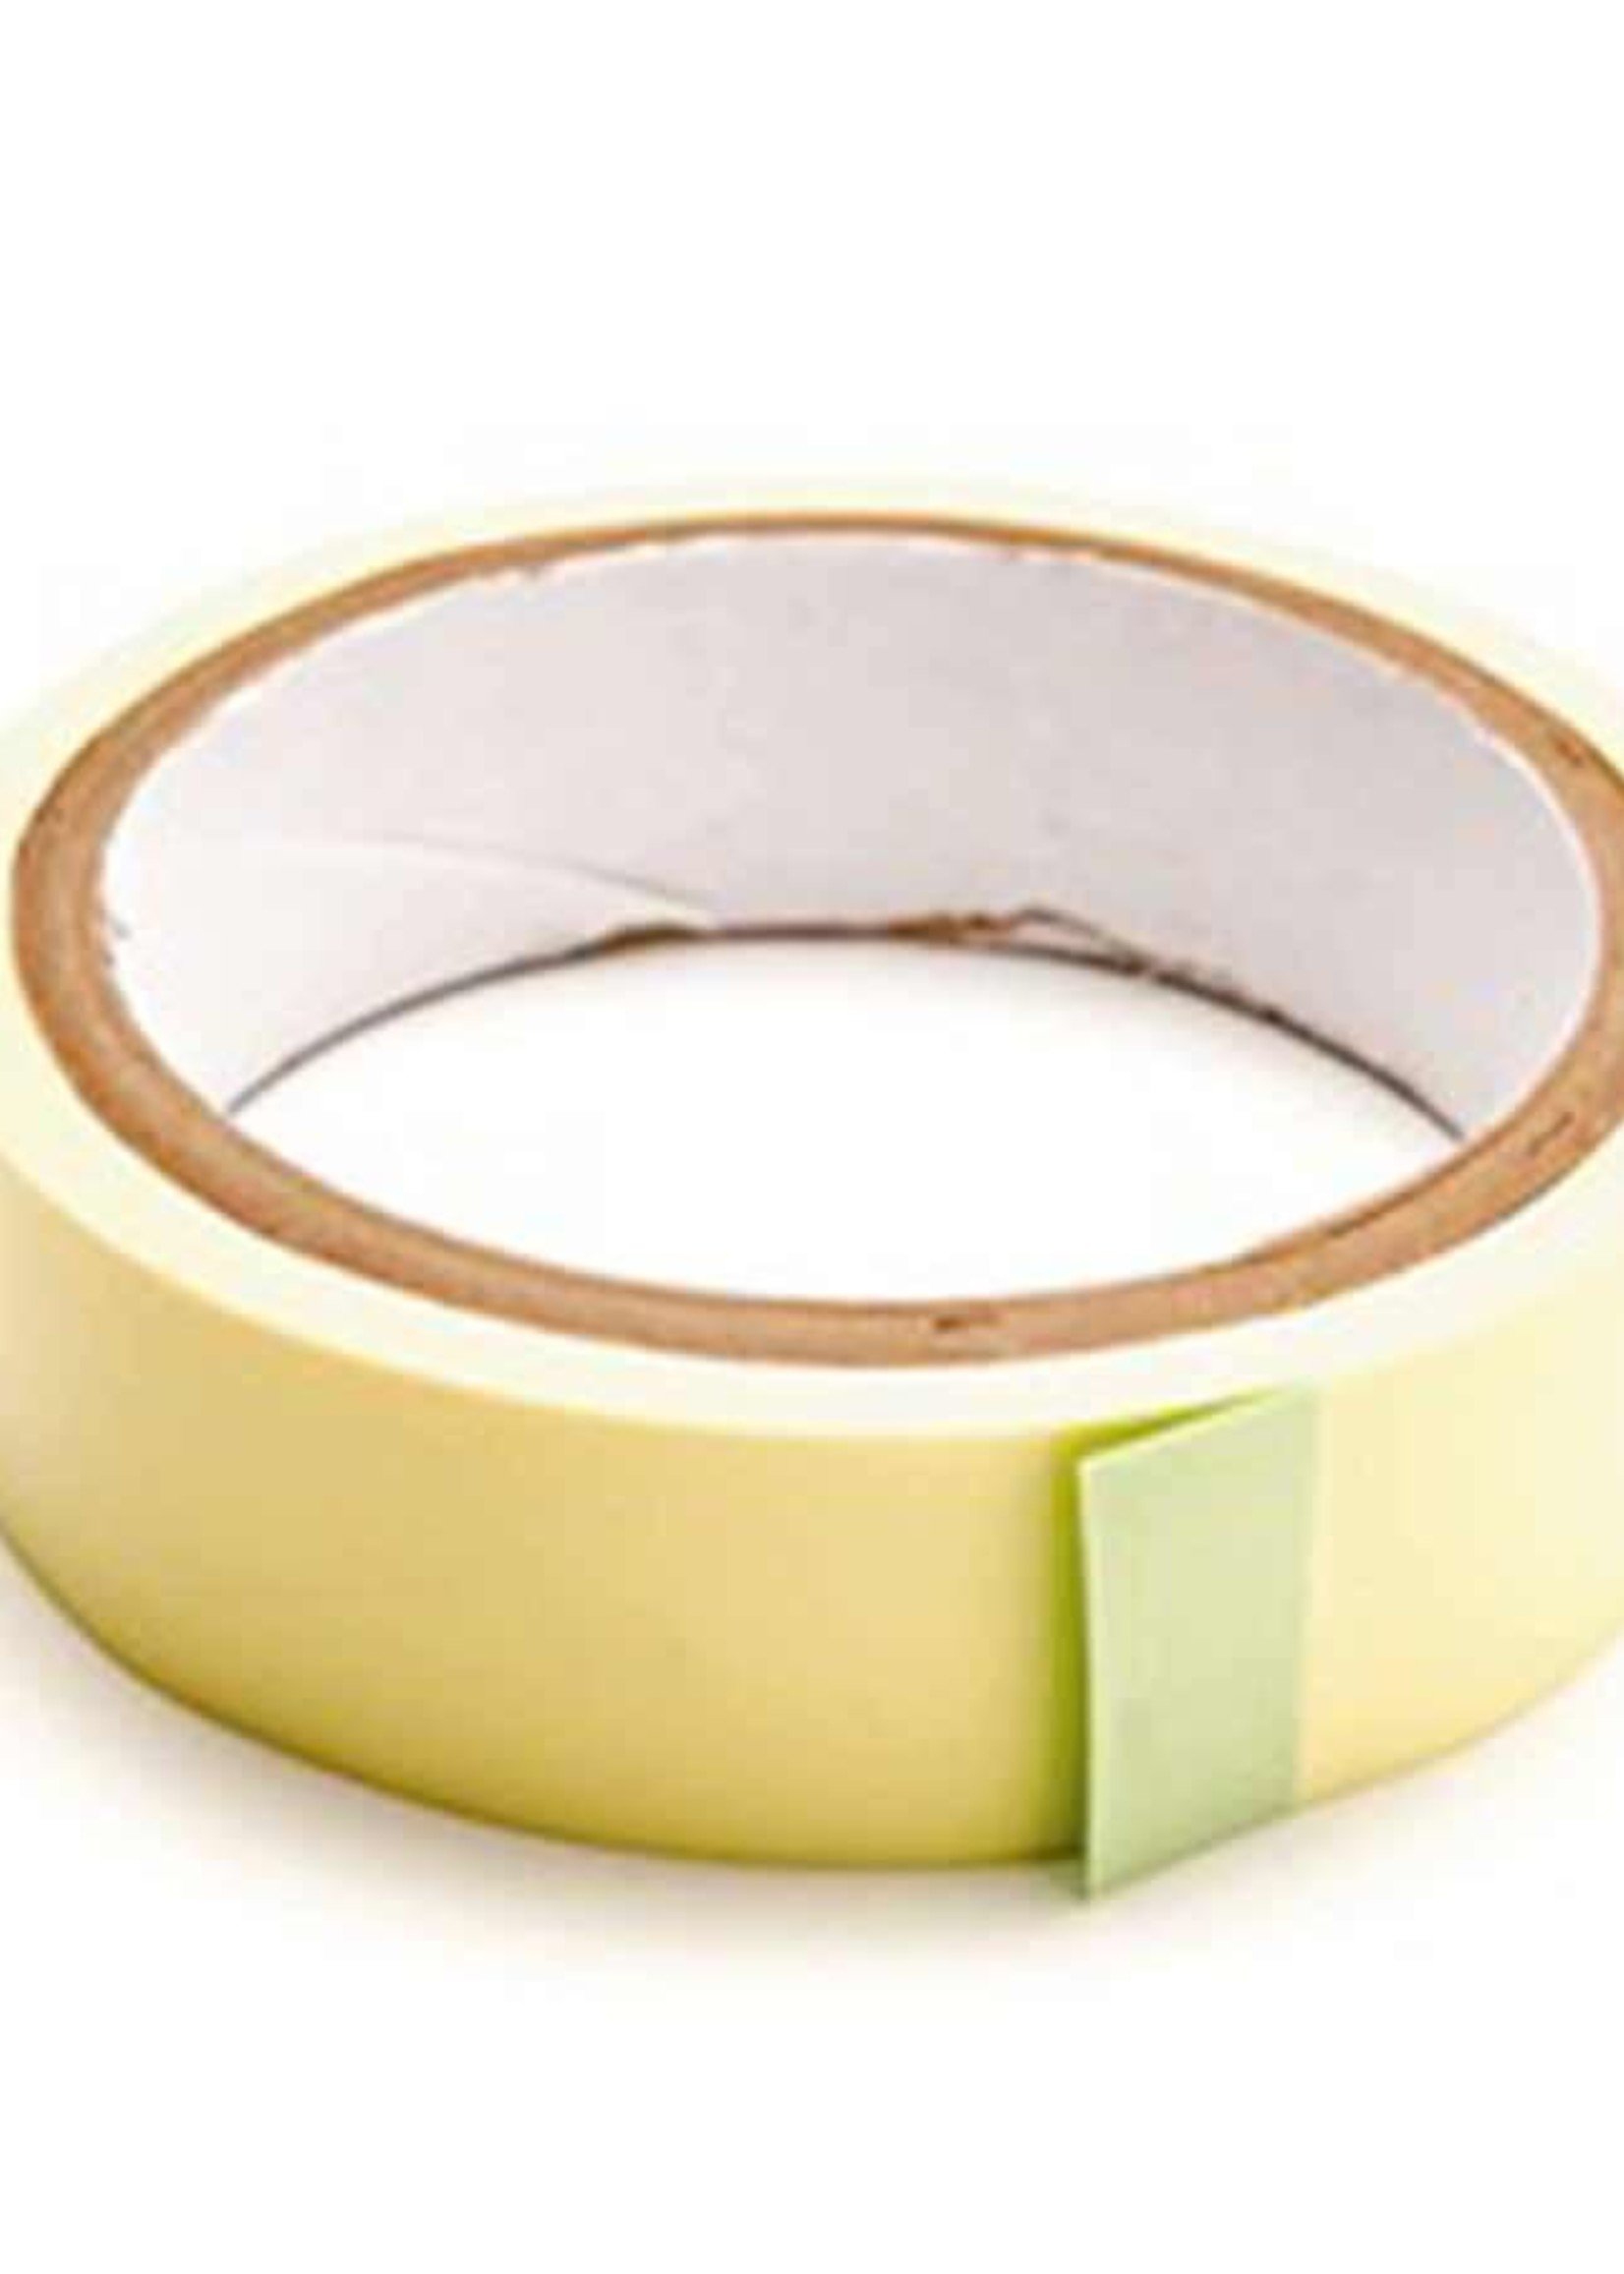 HLC Stan's No Tubes, Rim Tape, Yellow, 33mm x 9.14m roll